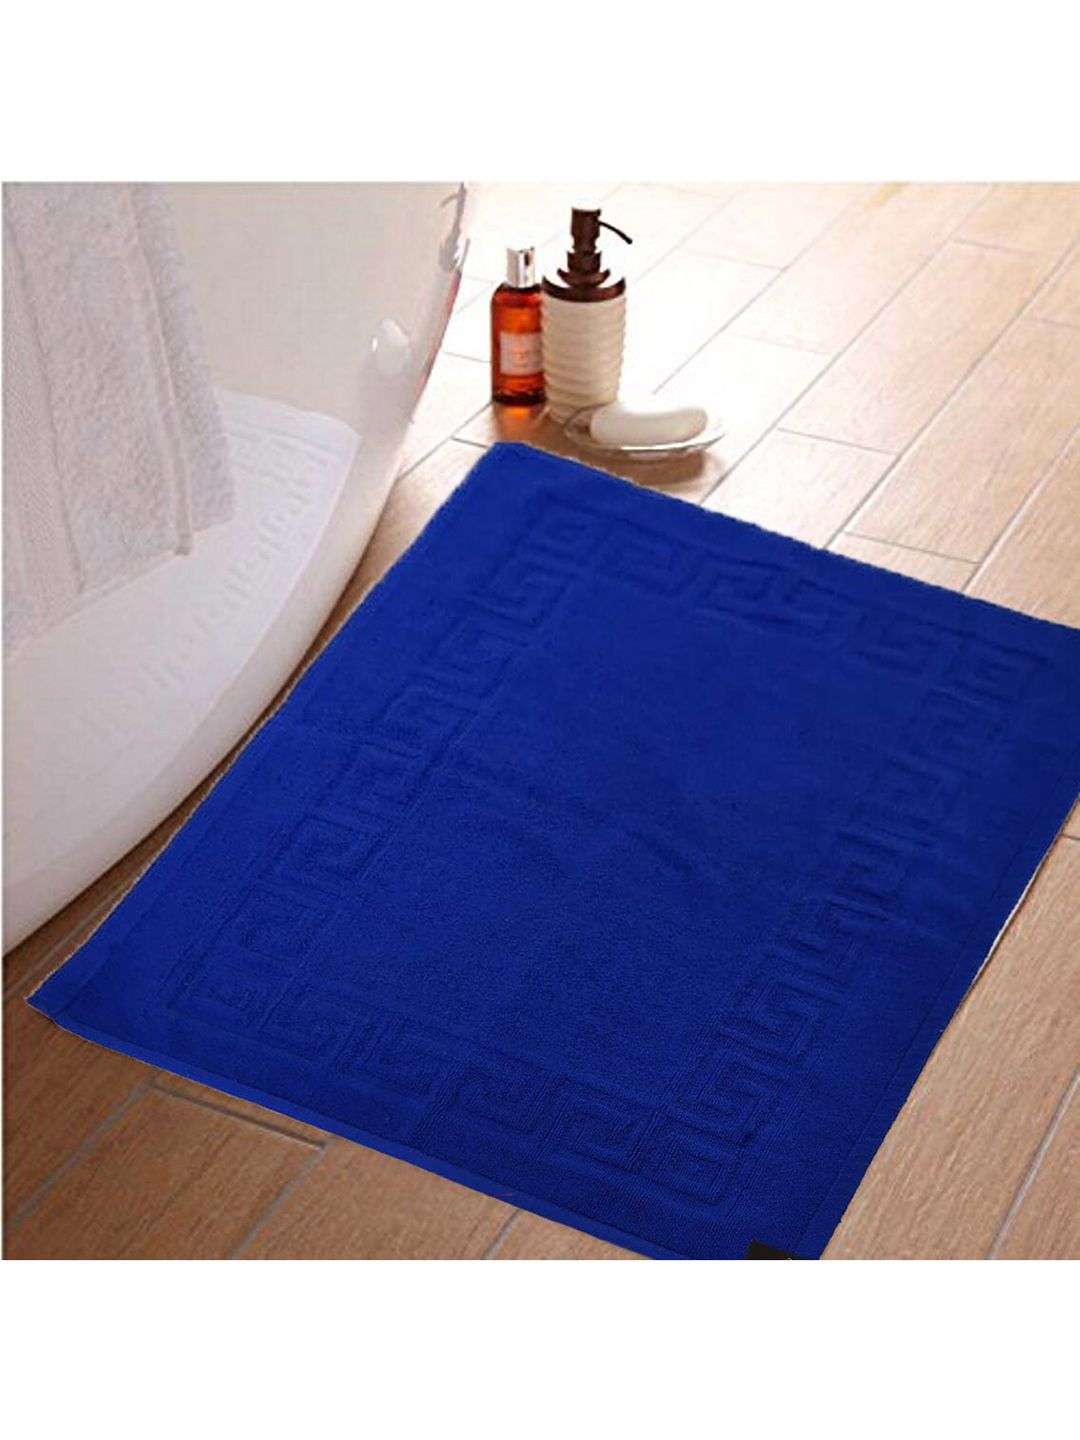 Lushomes Blue Rectangle Bath Rugs Price in India